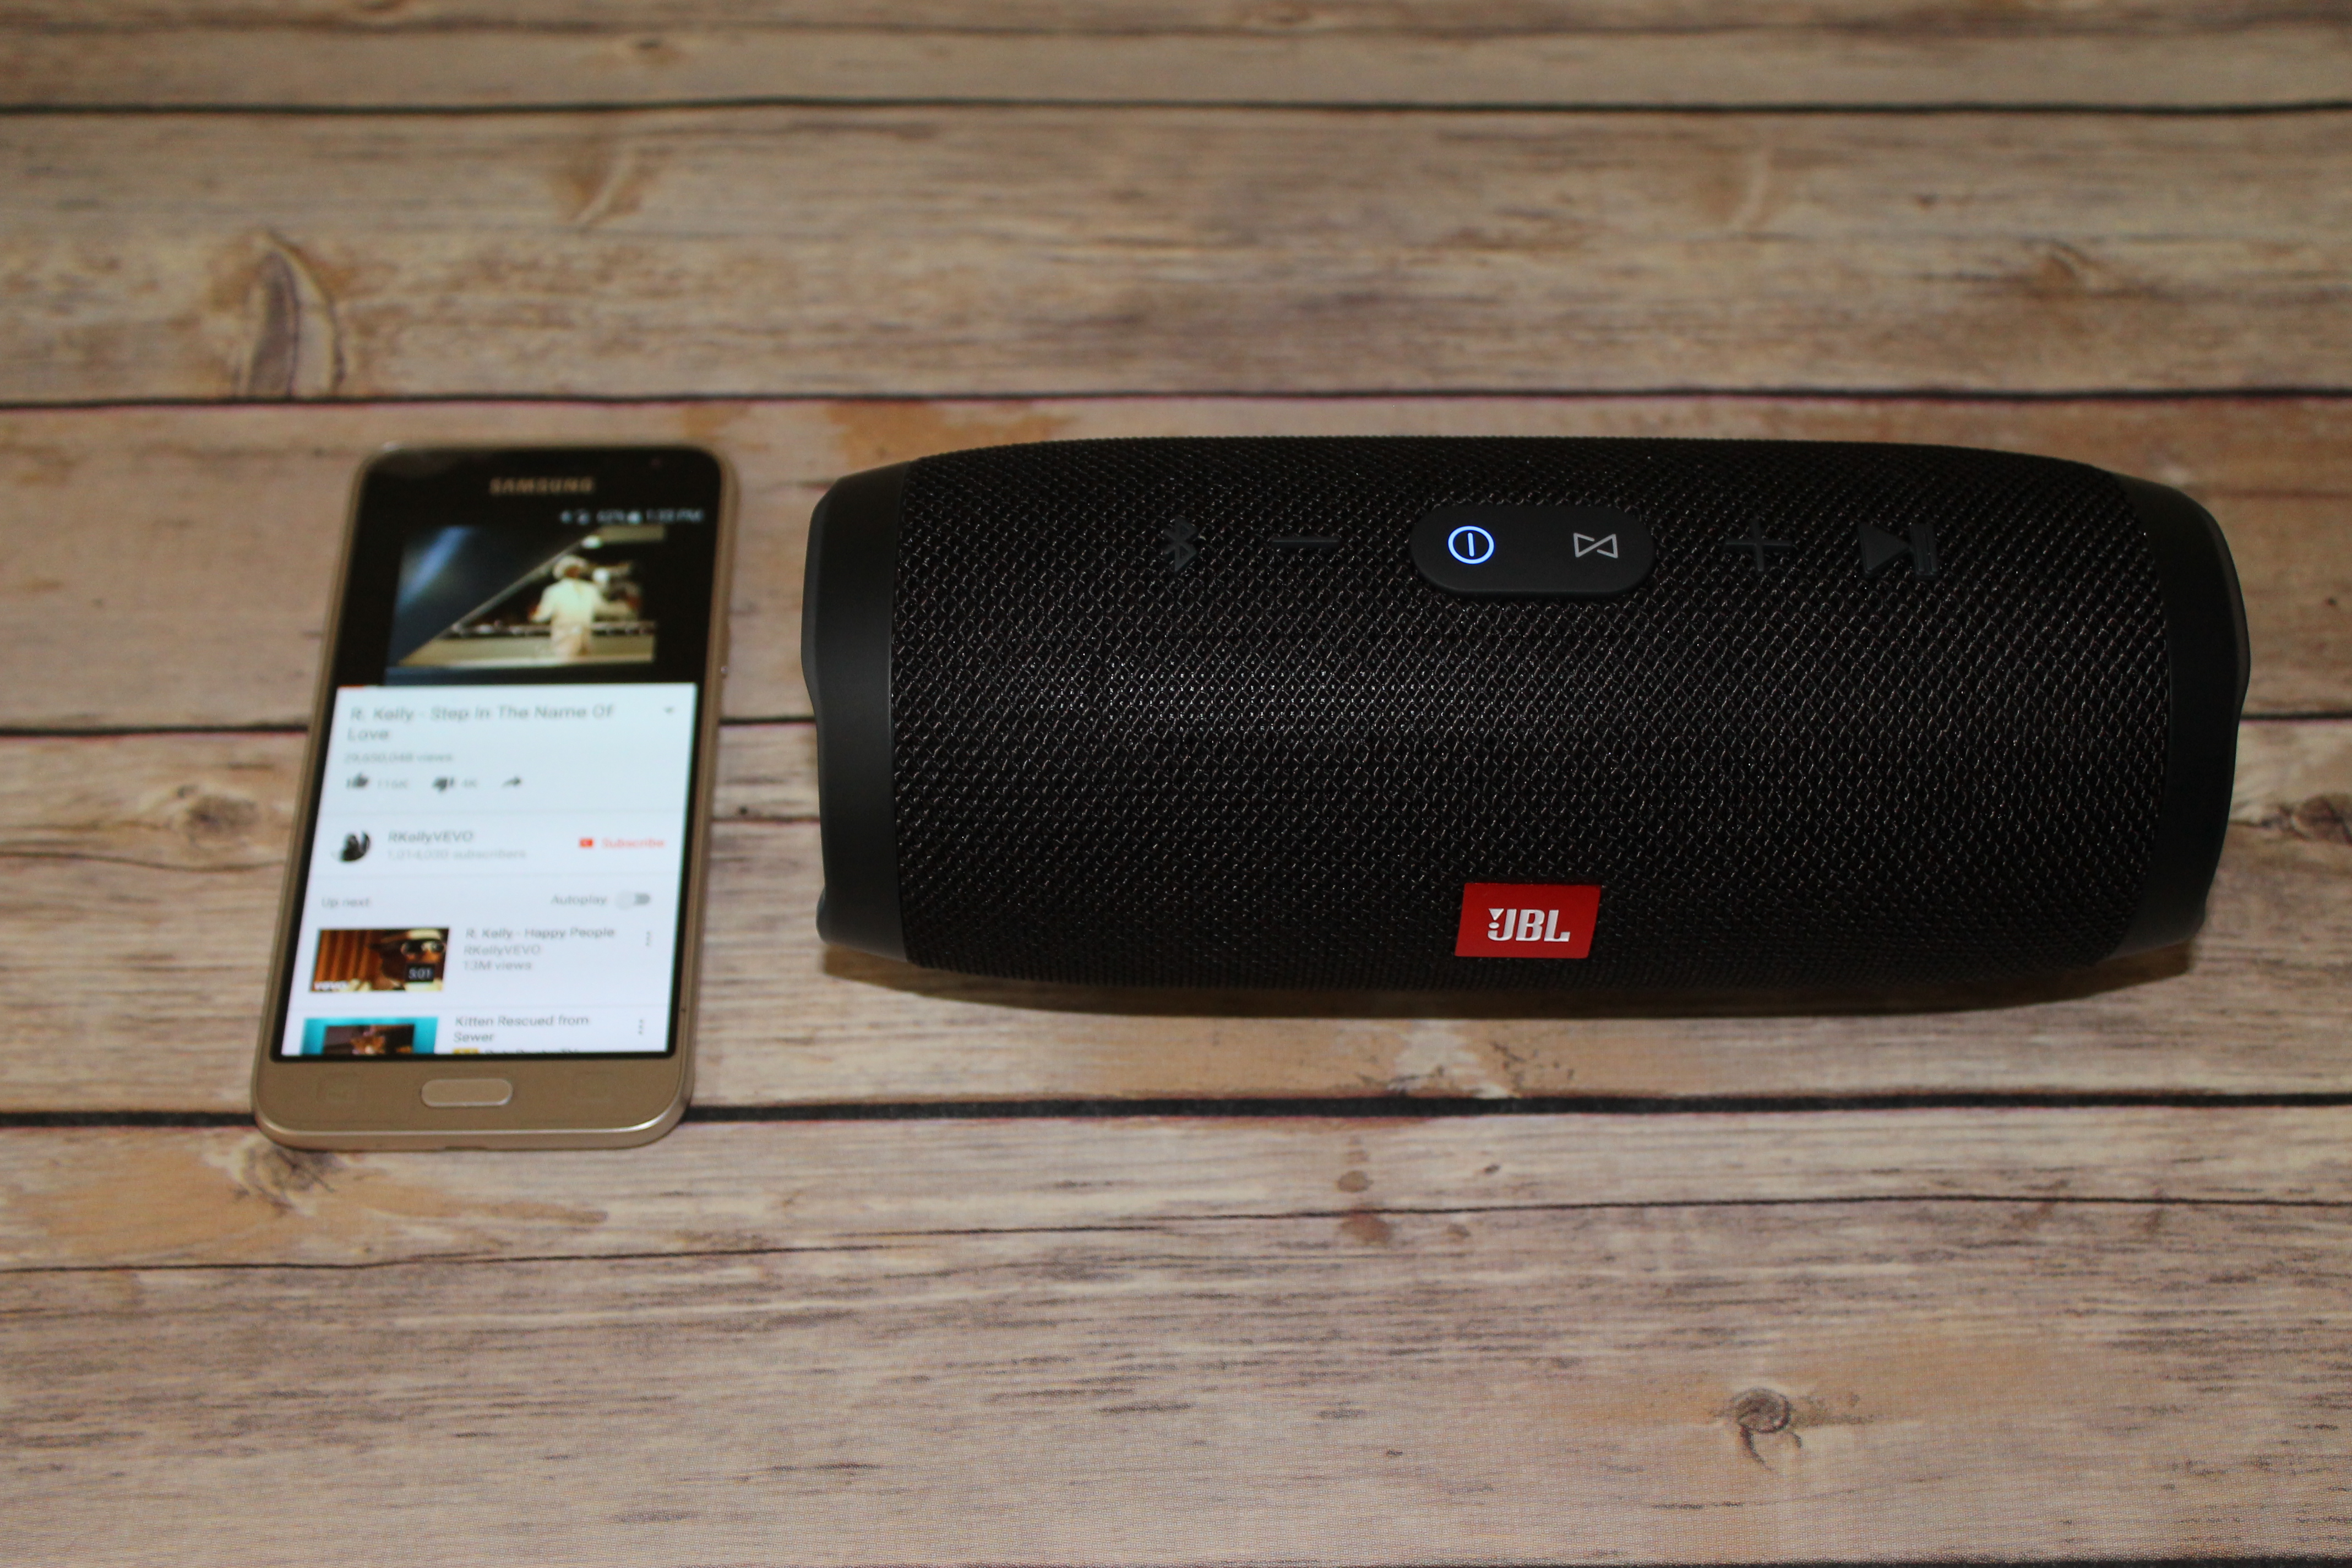 JBL Charge 3 Speaker, get ready to stream and enjoy your music anywhere